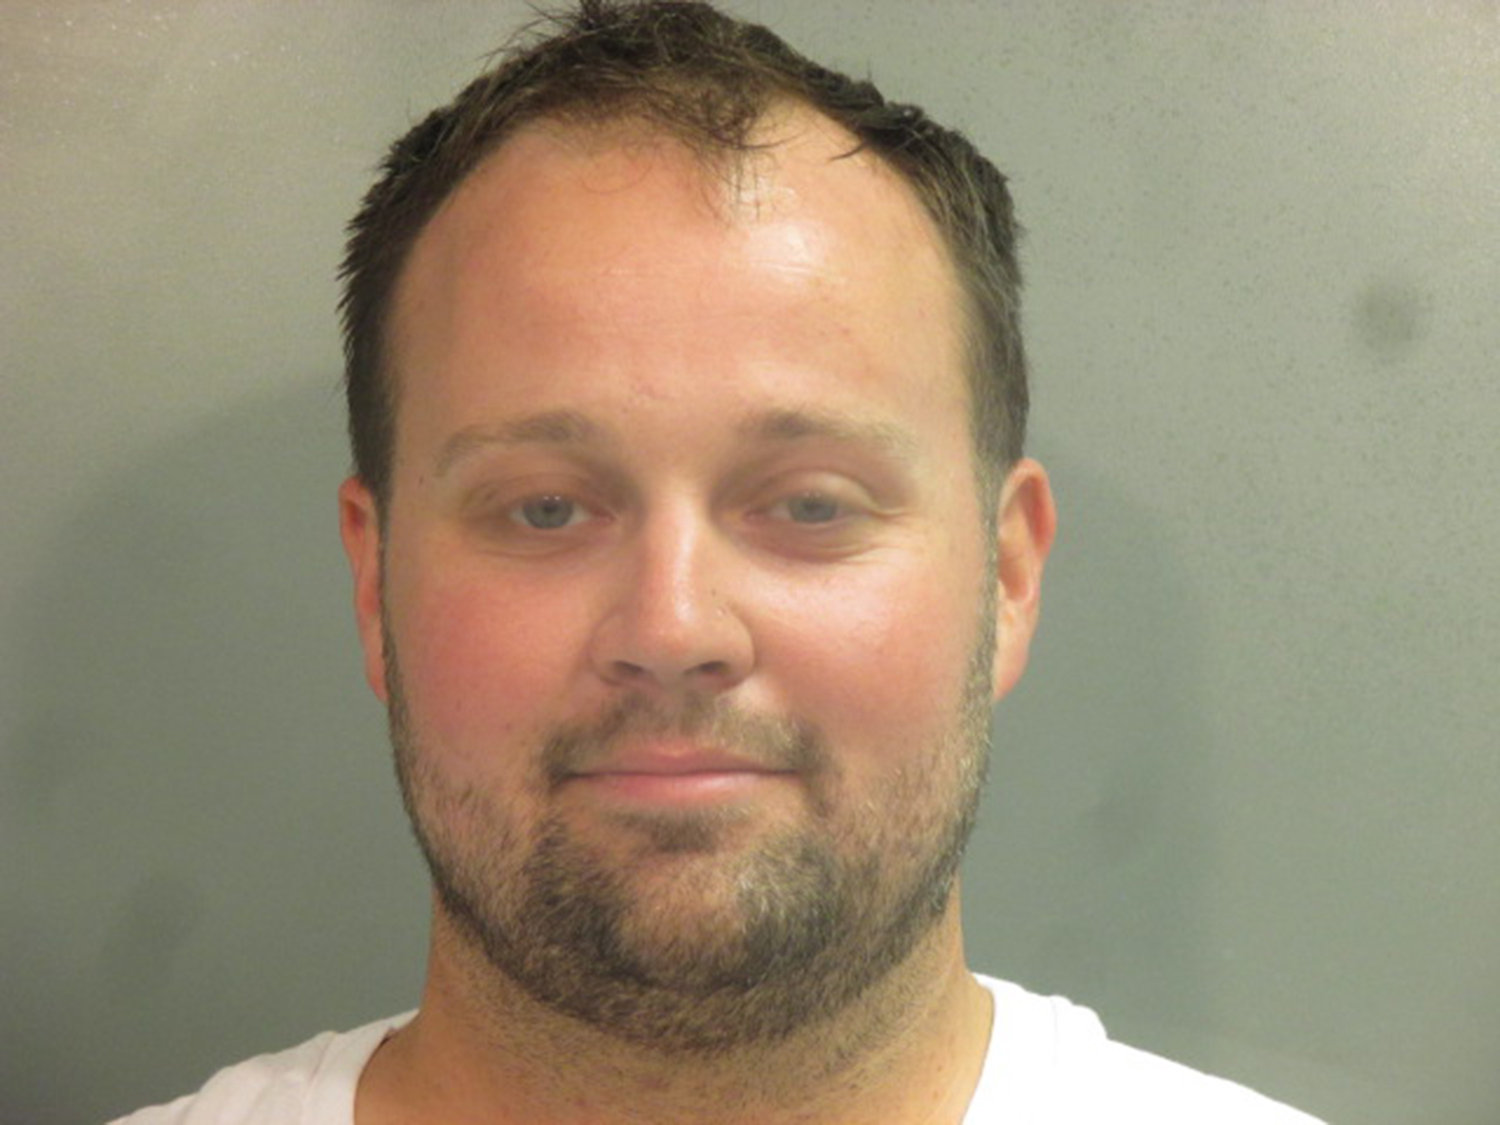 In this handout photo provided by the Washington County Sheriff's Office, former television personality on "19 Kids and Counting" Josh Duggar poses for a booking photo after his arrest on April 29, 2021, in Fayetteville, Arkansas. Duggar was convicted Thursday at his child pornography trial. (Washington County Sheriff's Office via Getty Images/TNS)